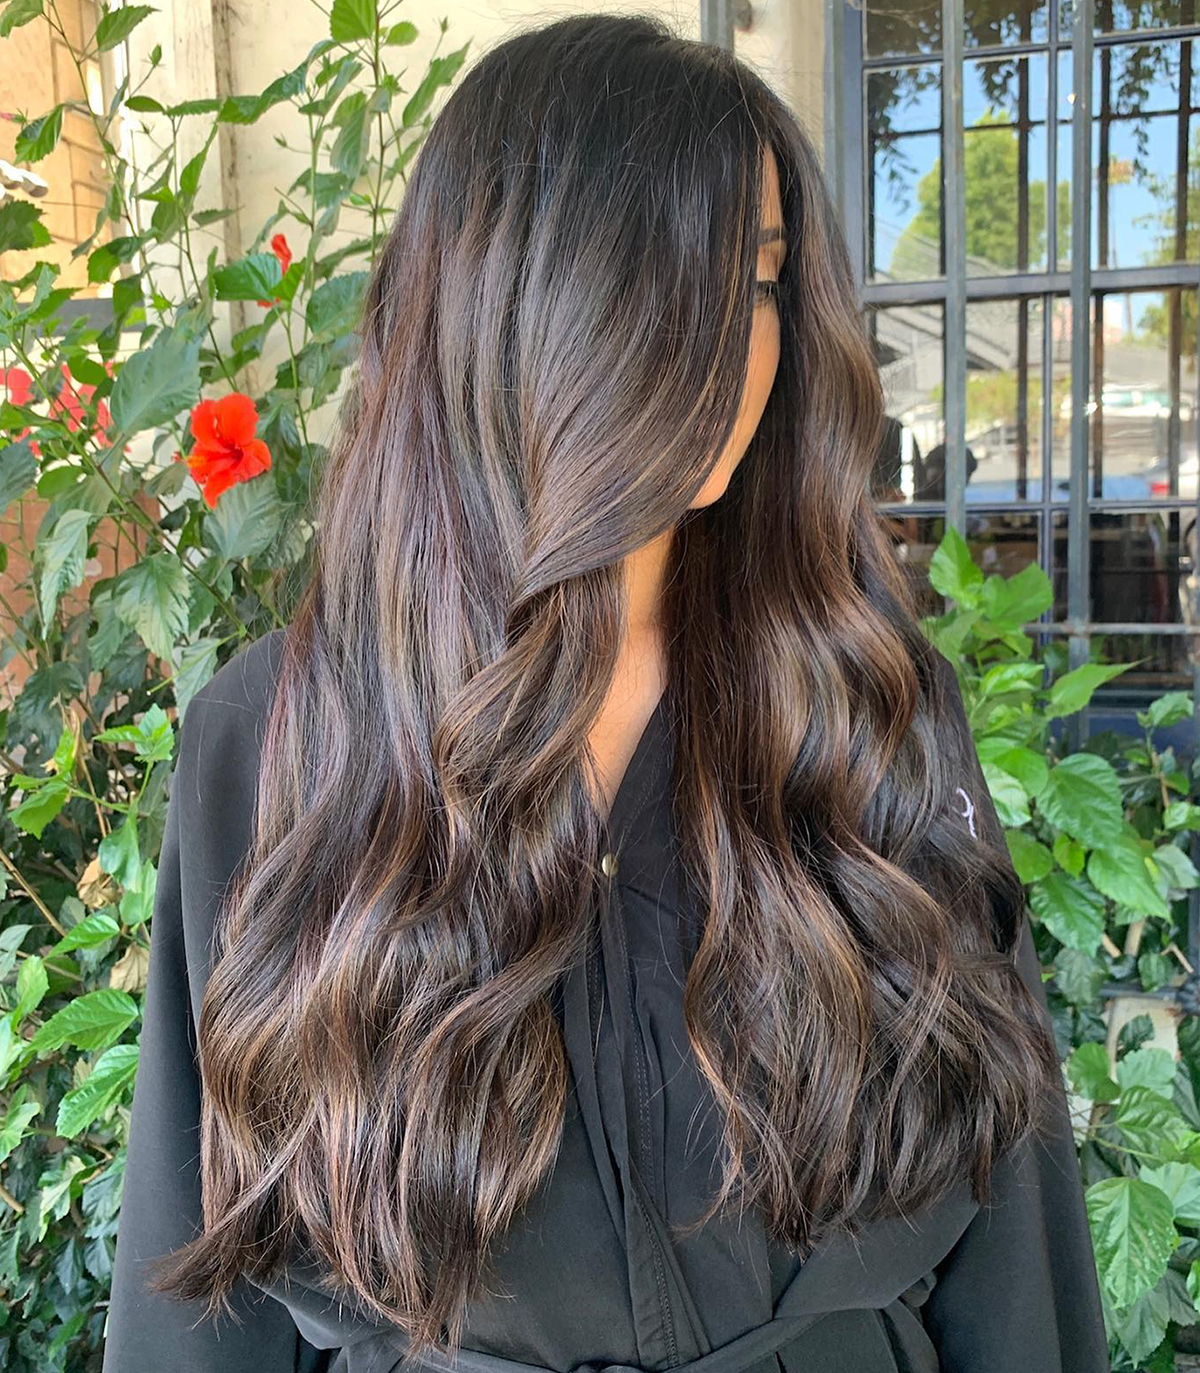 15 Dark Hair Color Ideas for Fall | Who What Wear